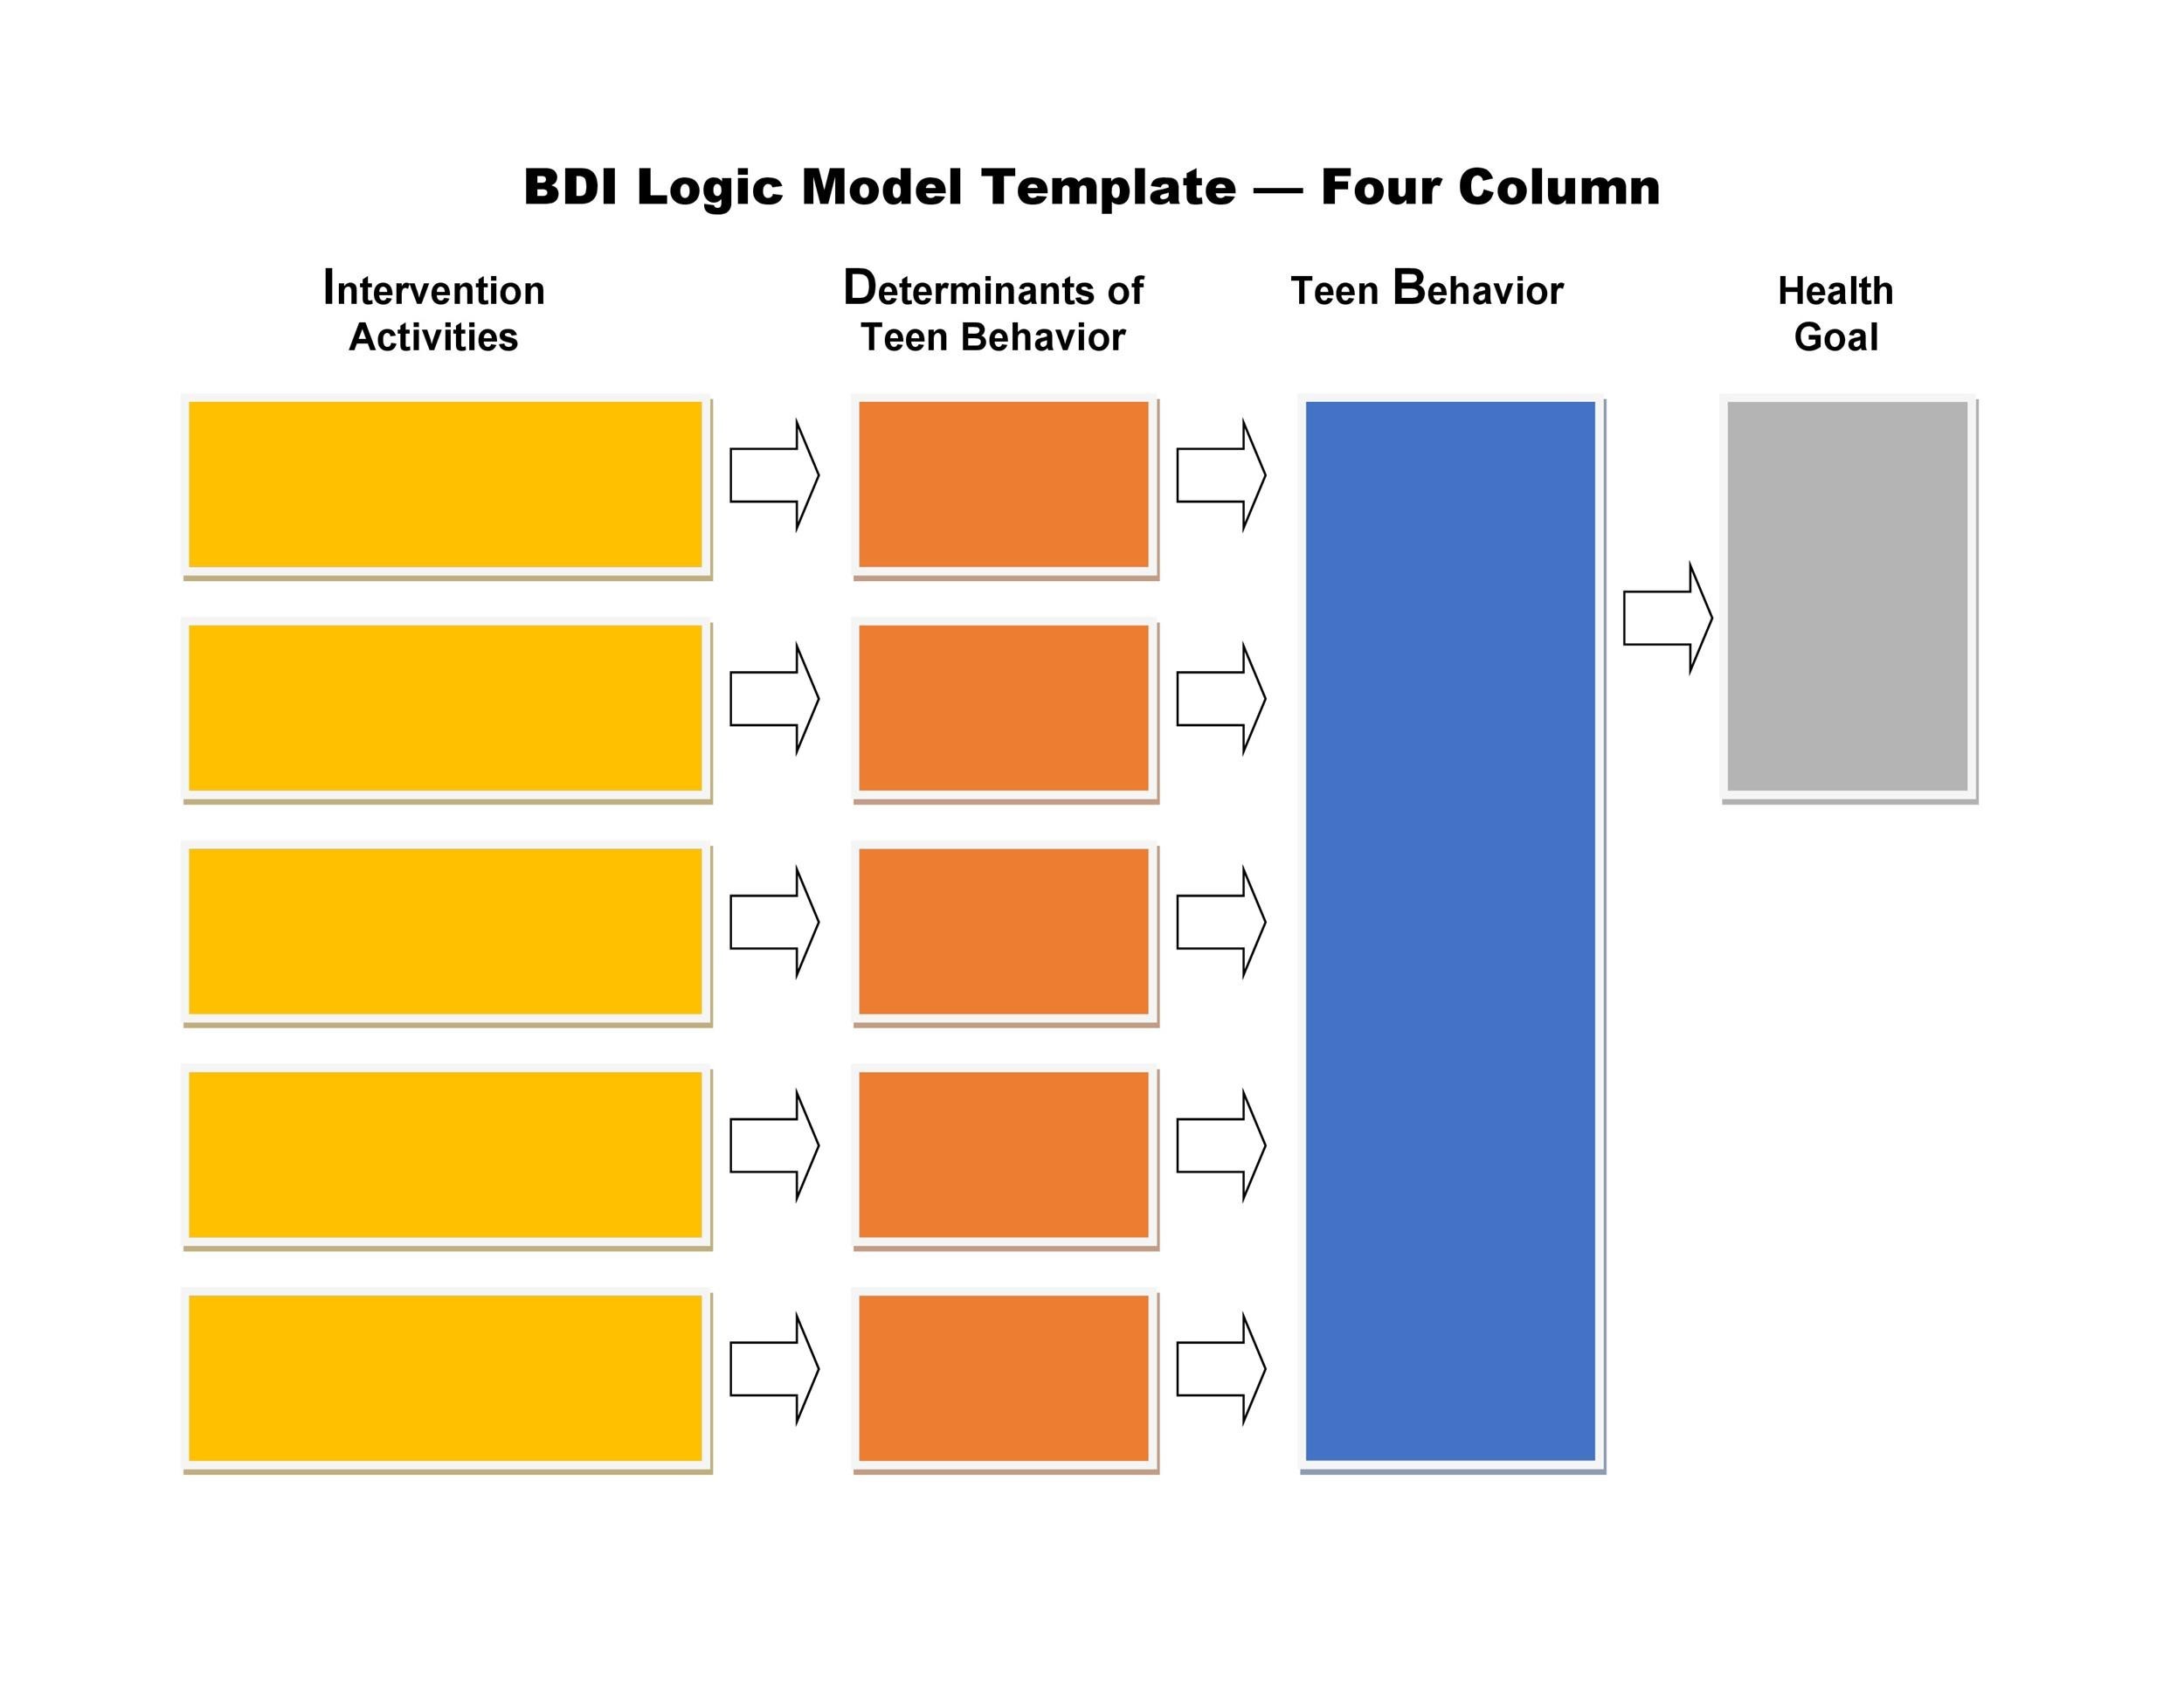 More than 40 Logic Model Templates & Examples ᐅ TemplateLab